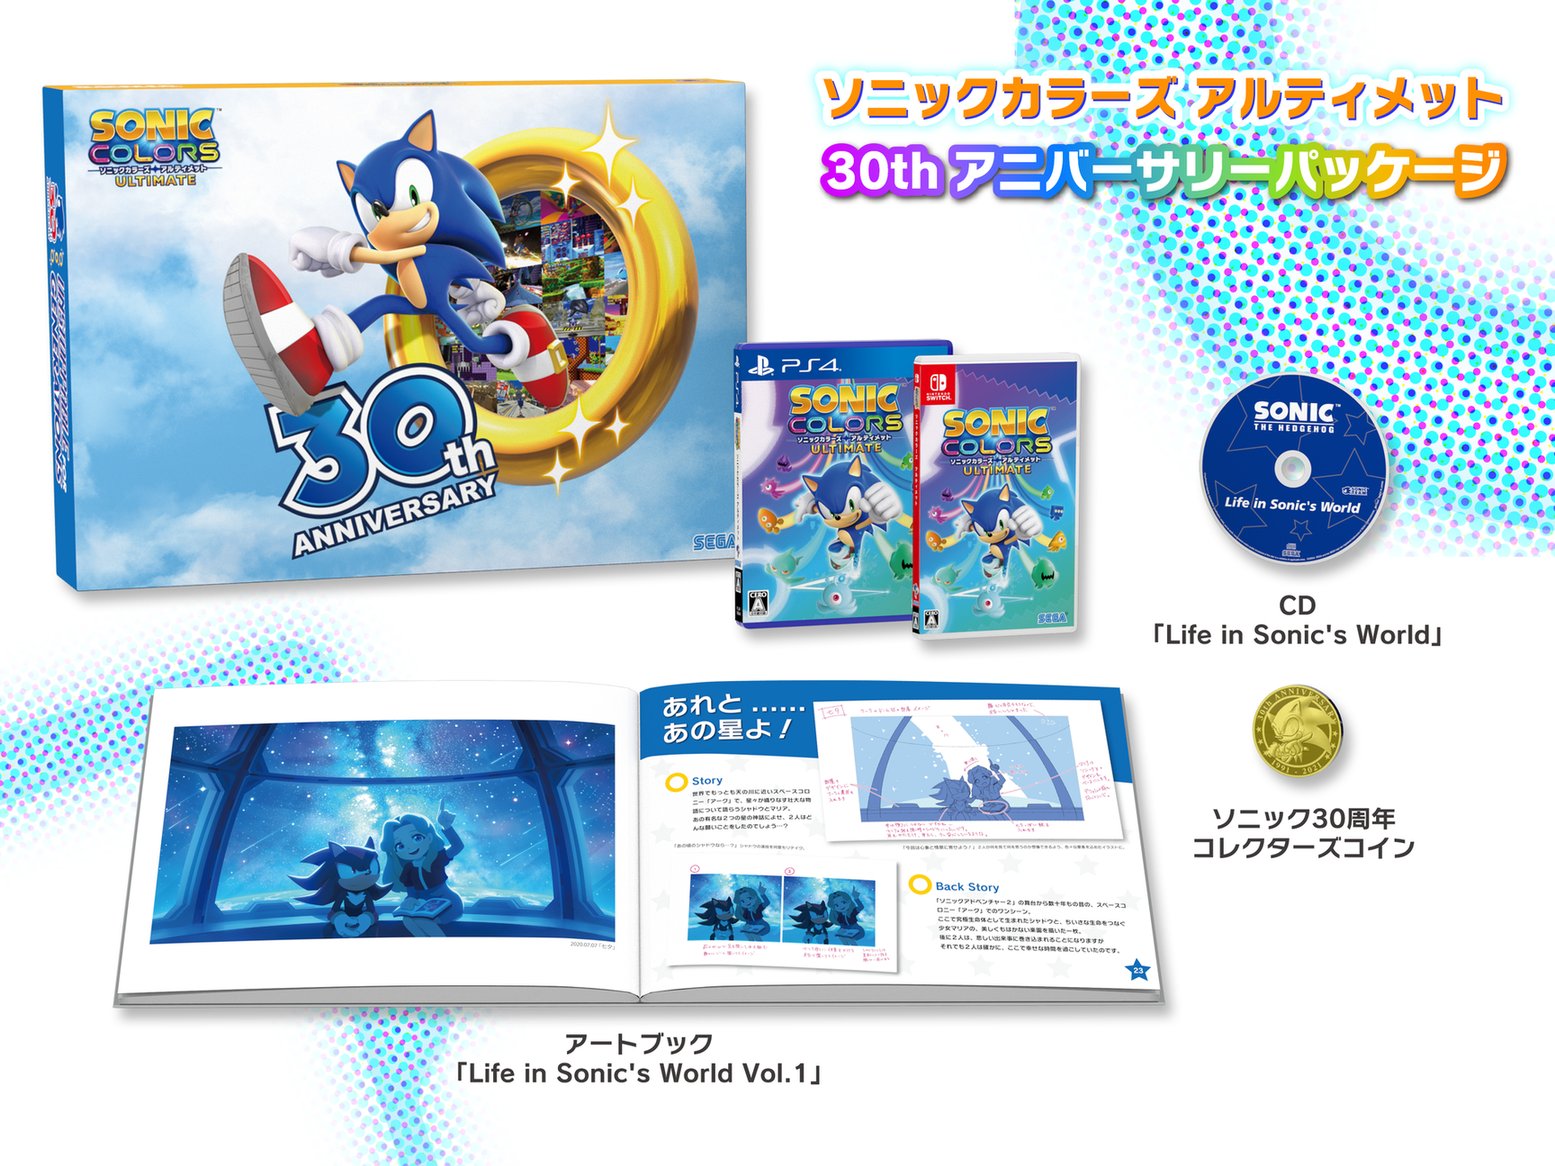 Sonic Colors Ultimate 30th Anniversary Package Revealed In Japan Nintendosoup